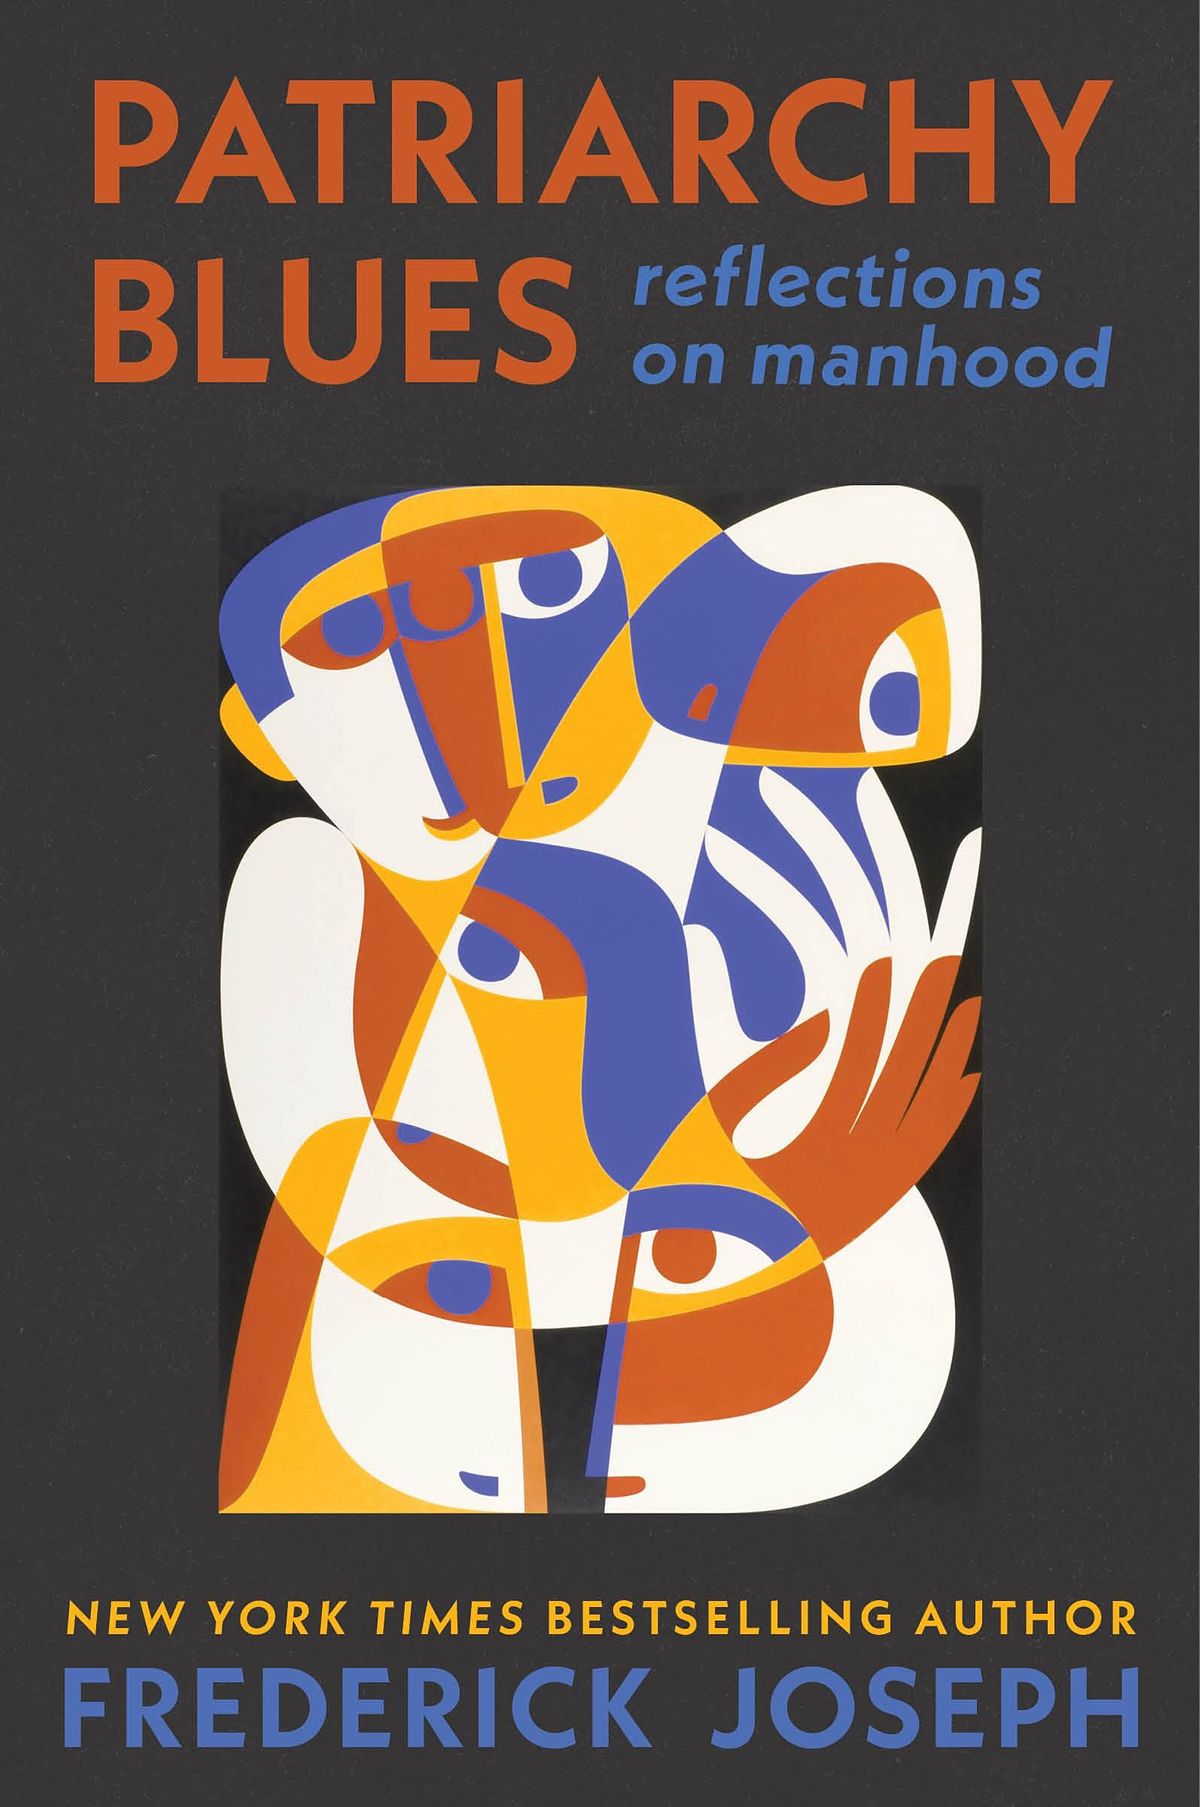 Patriarchy Blues: Reflections on Manhood Book Event with Frederick Joseph